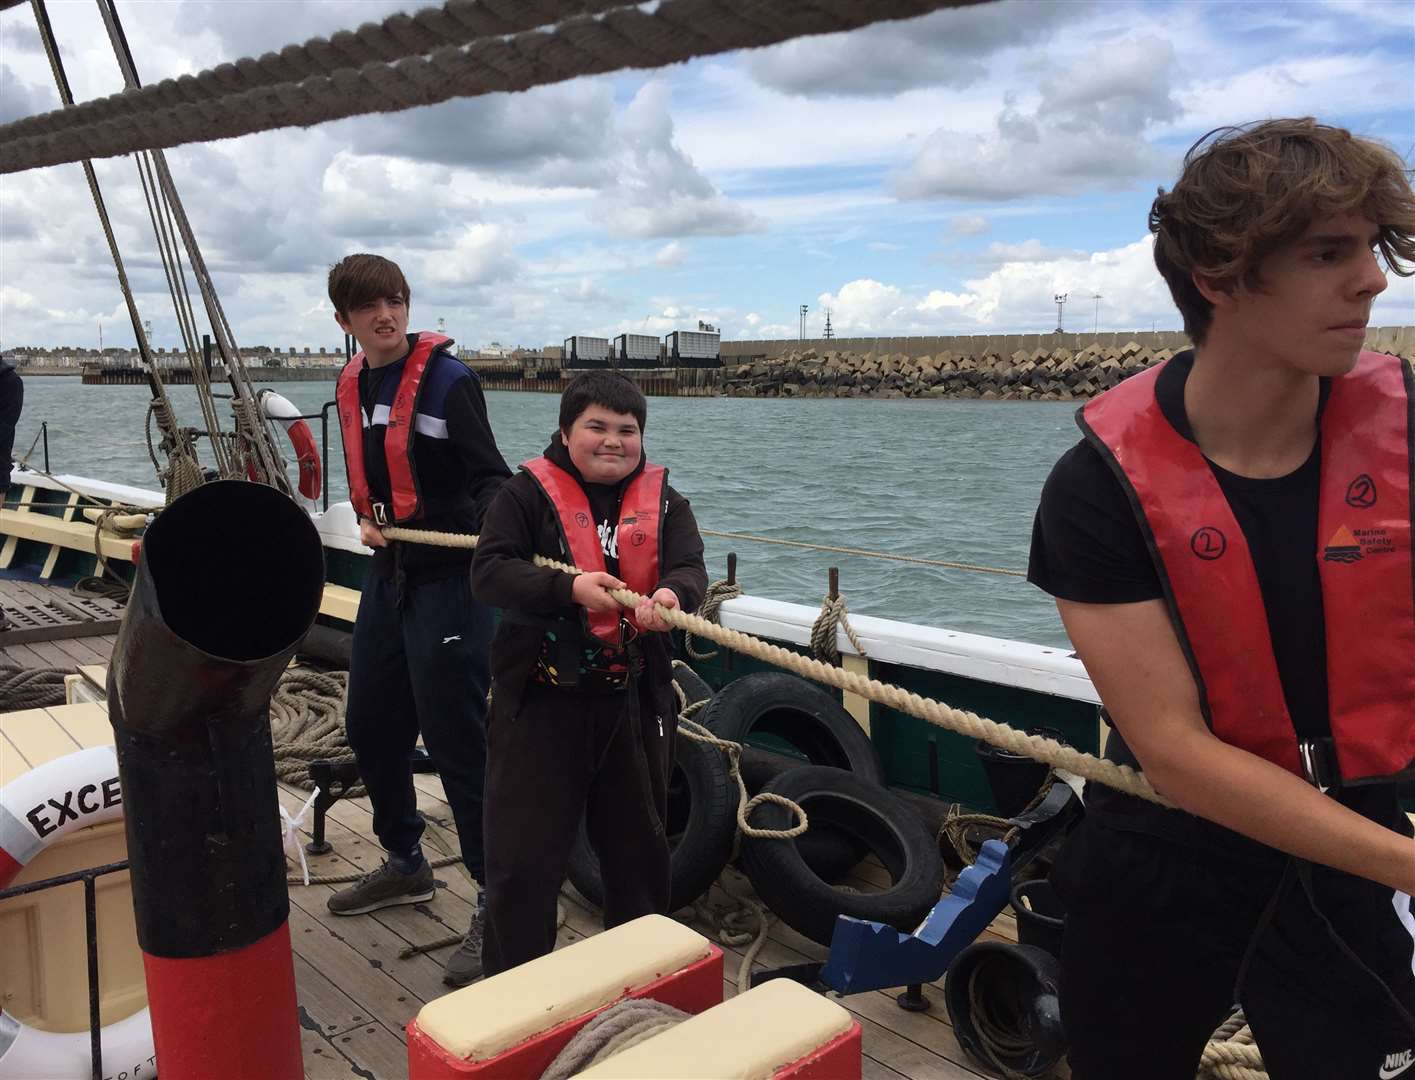 The students sailed from Lowestoft to Yarmouth. Credit: Barking Dog Media.